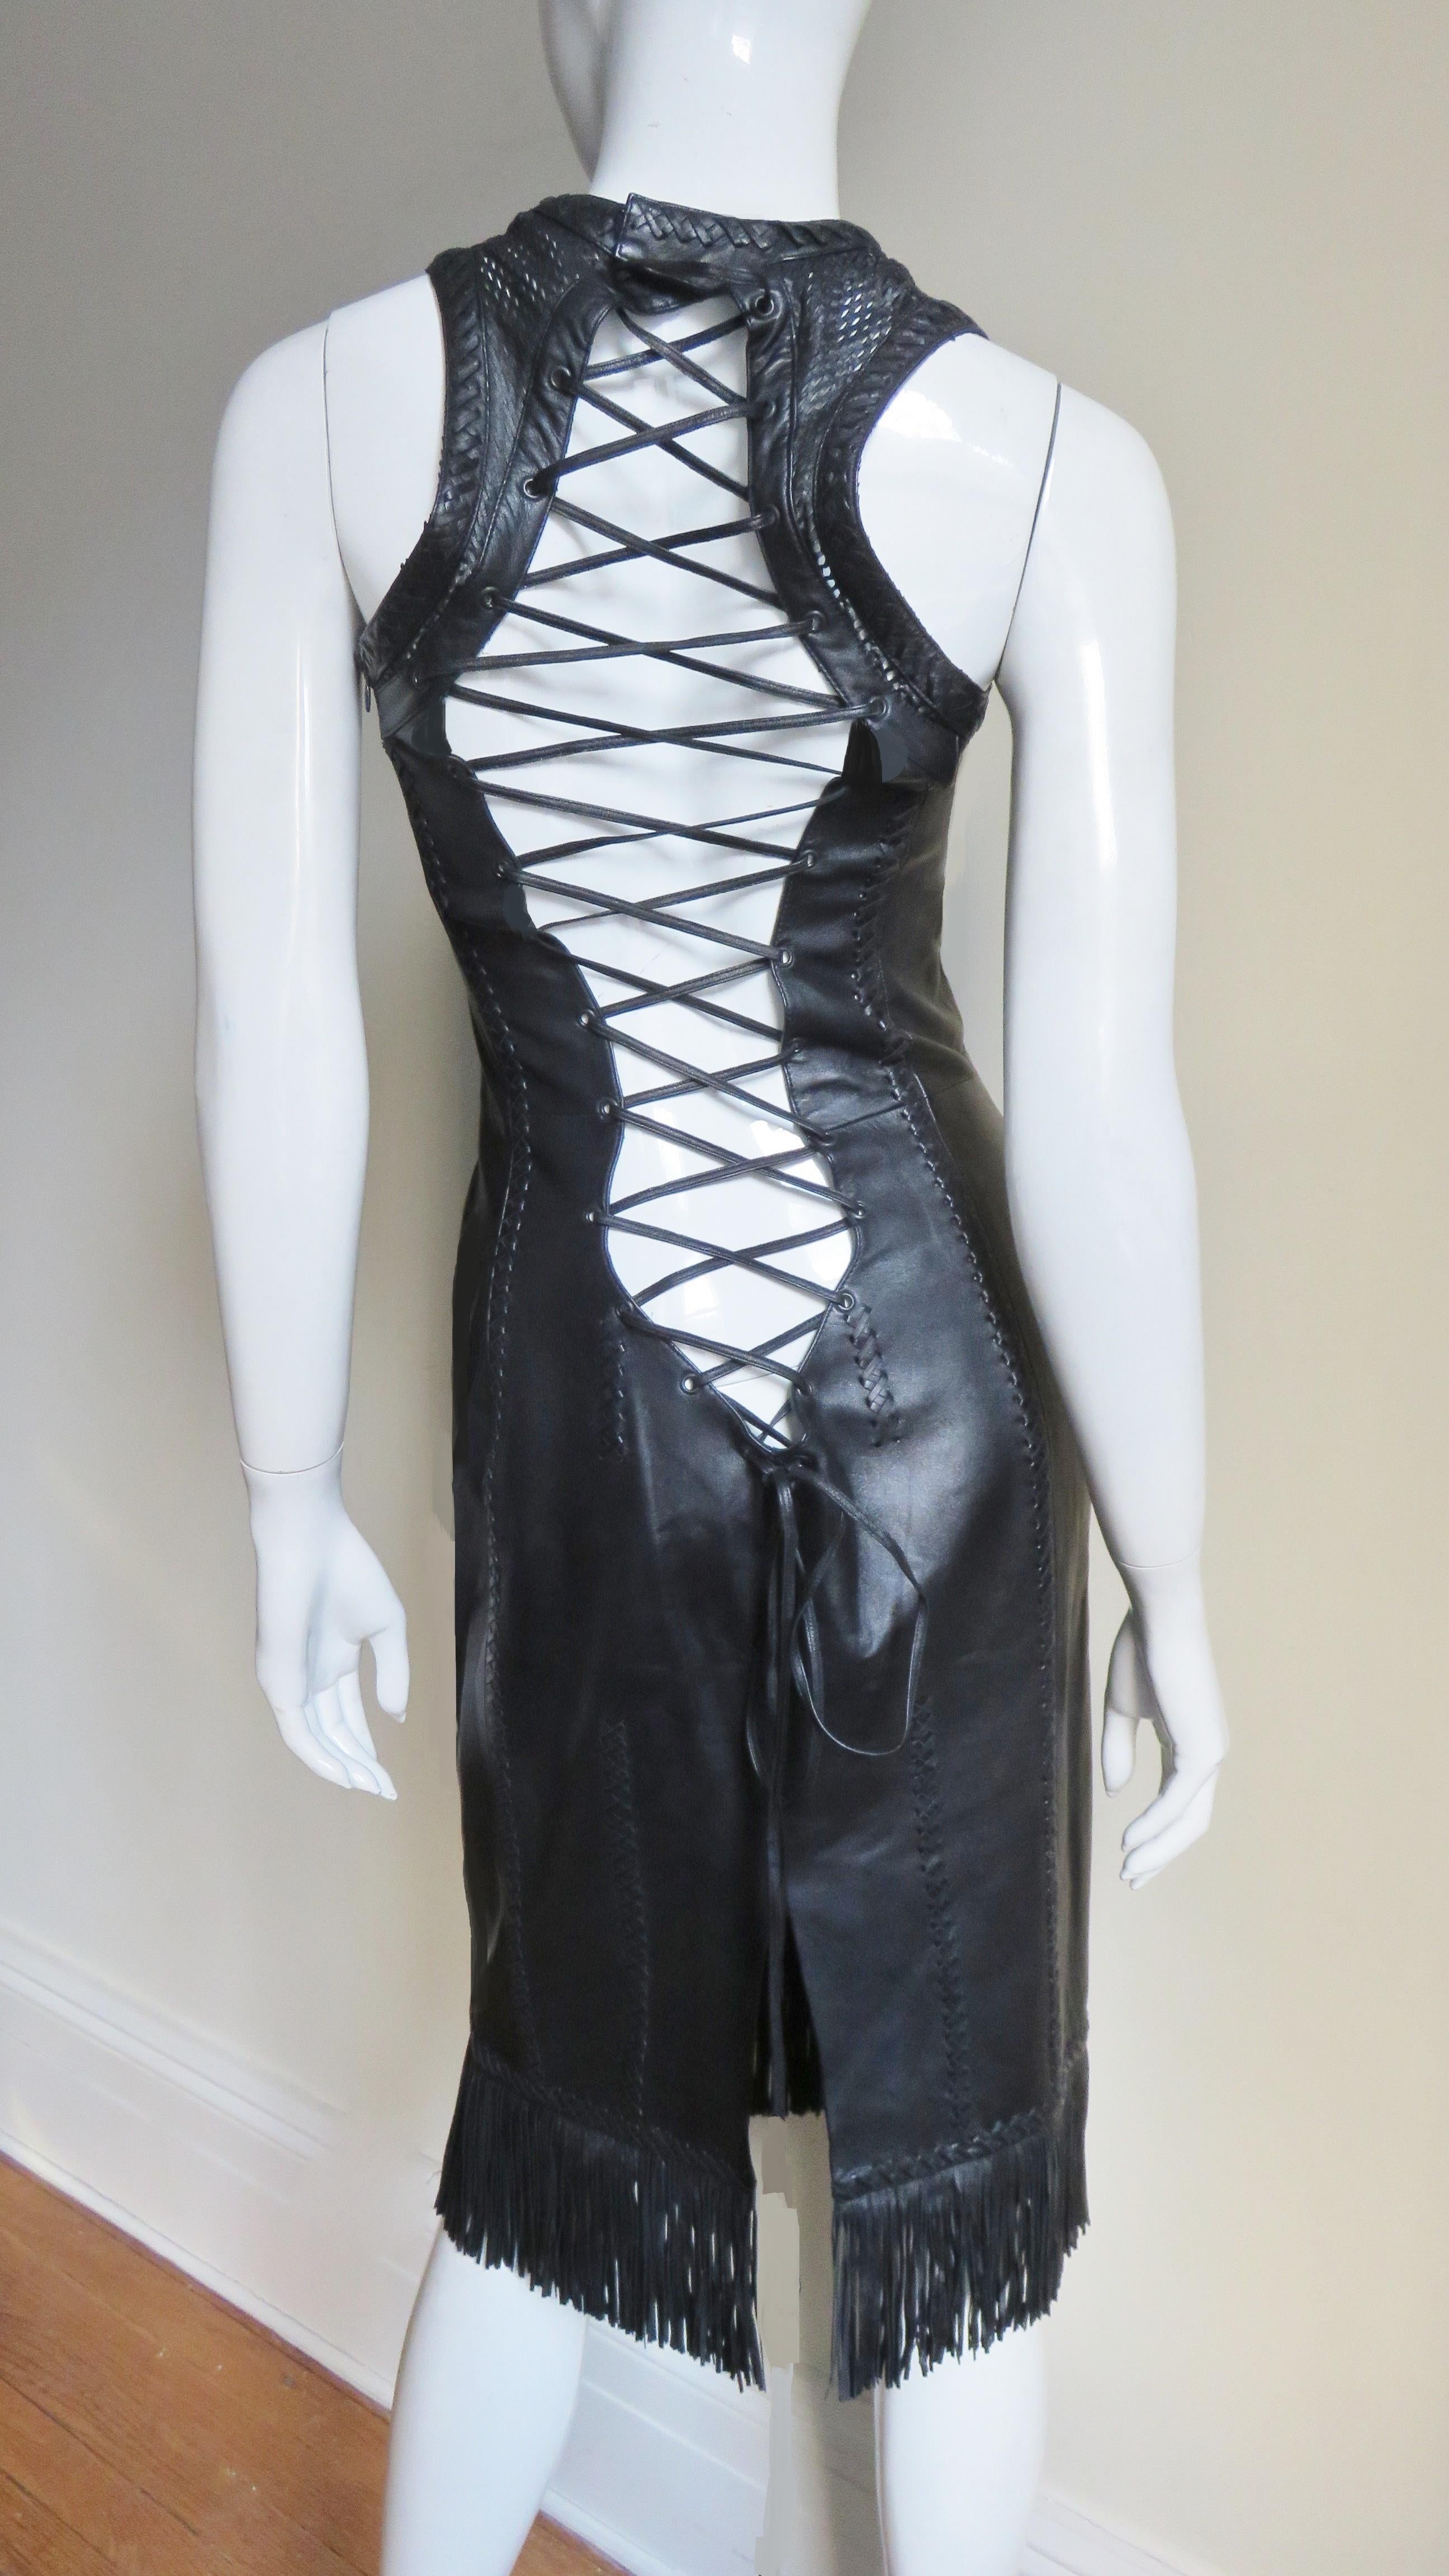  Gianni Versace Leather Lace up Dress S/S 2002 For Sale 10